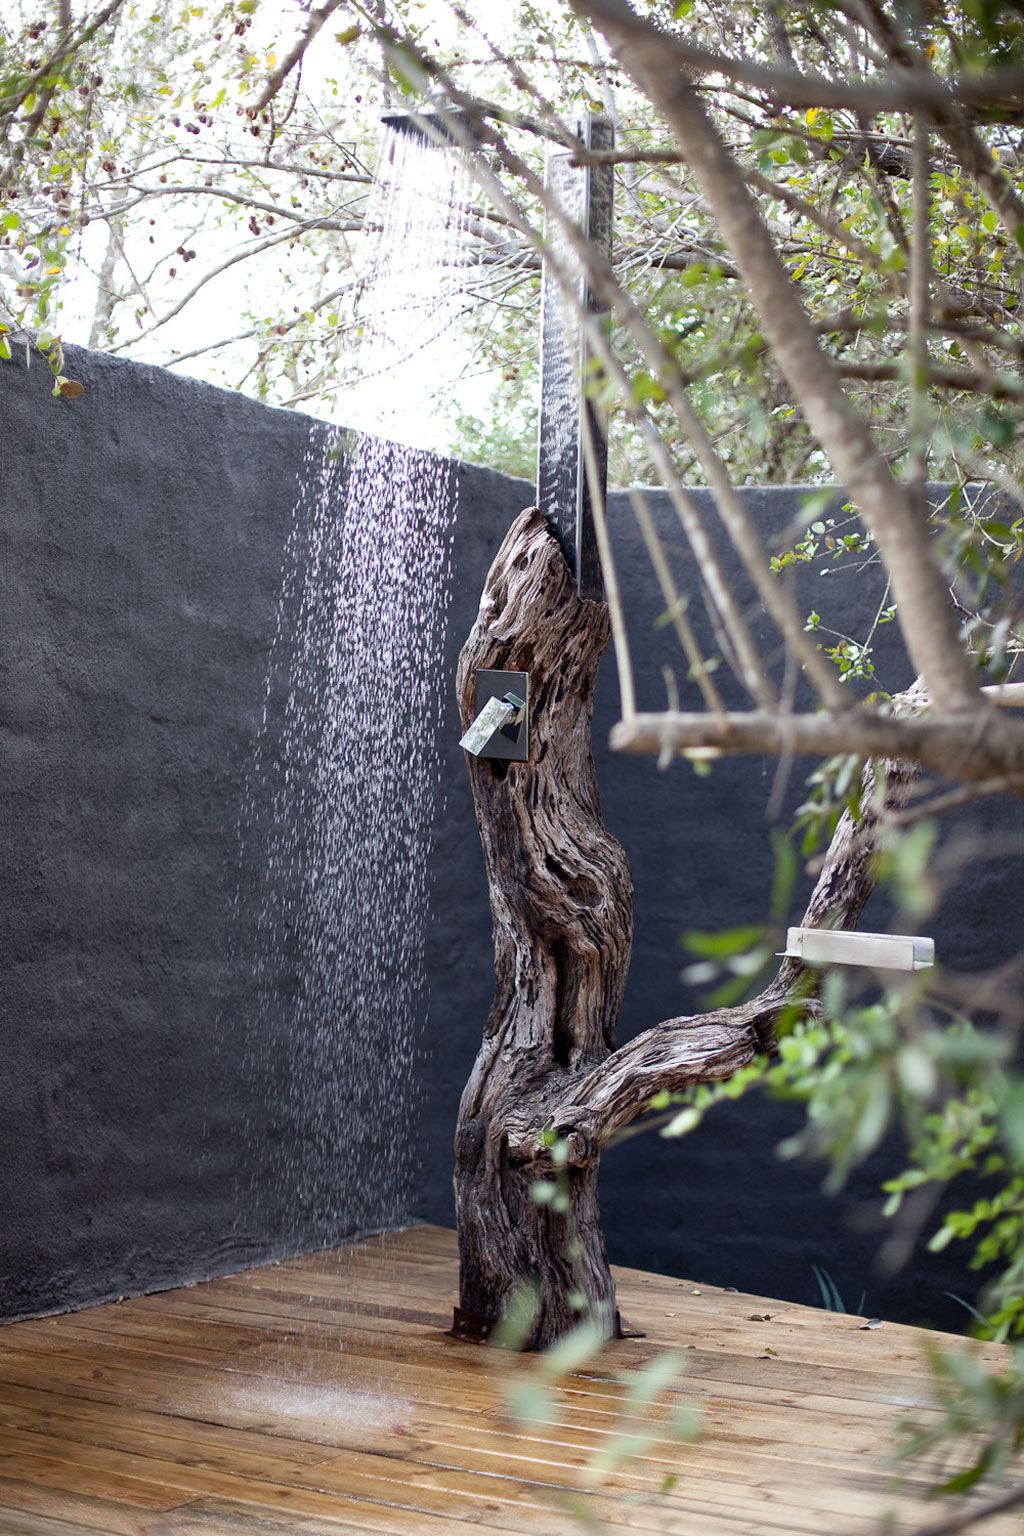 Epitome Of Luxury 30 Refreshing Outdoor Showers